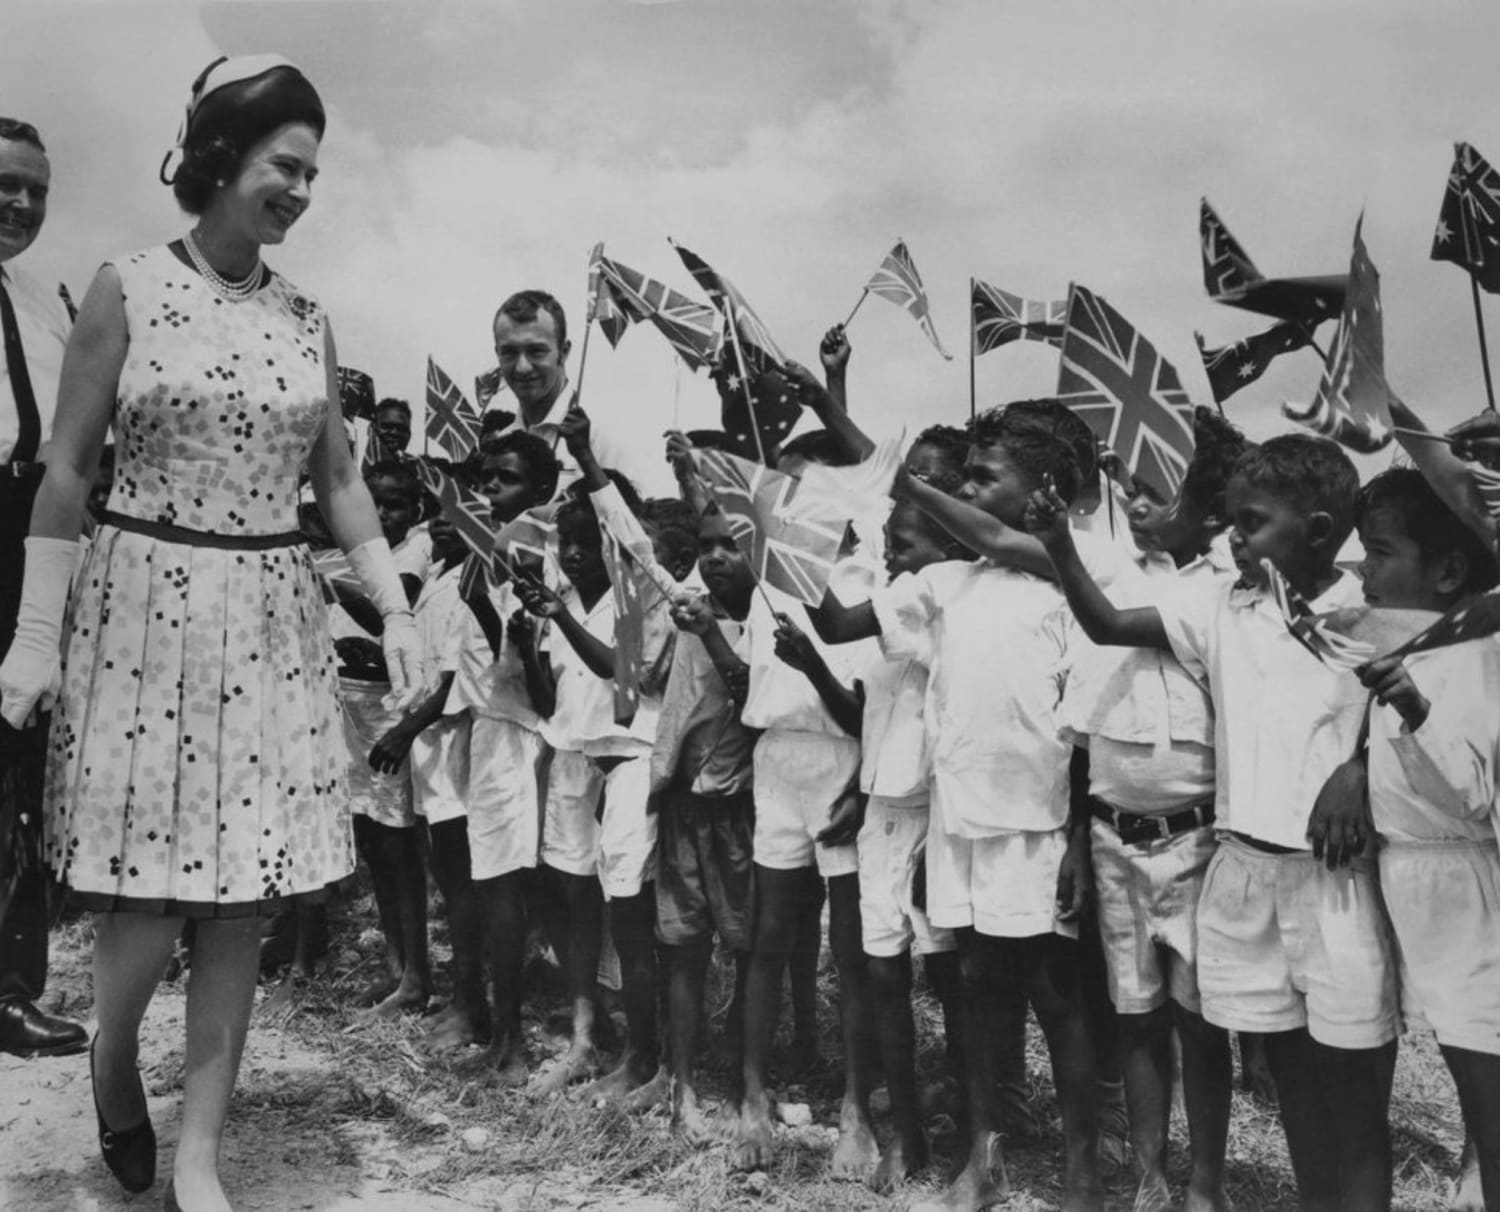 Queen Elizabeth II is greeted by local children at Cooktown in Queensland, during her Royal tour of Australia. April 22, 1970.